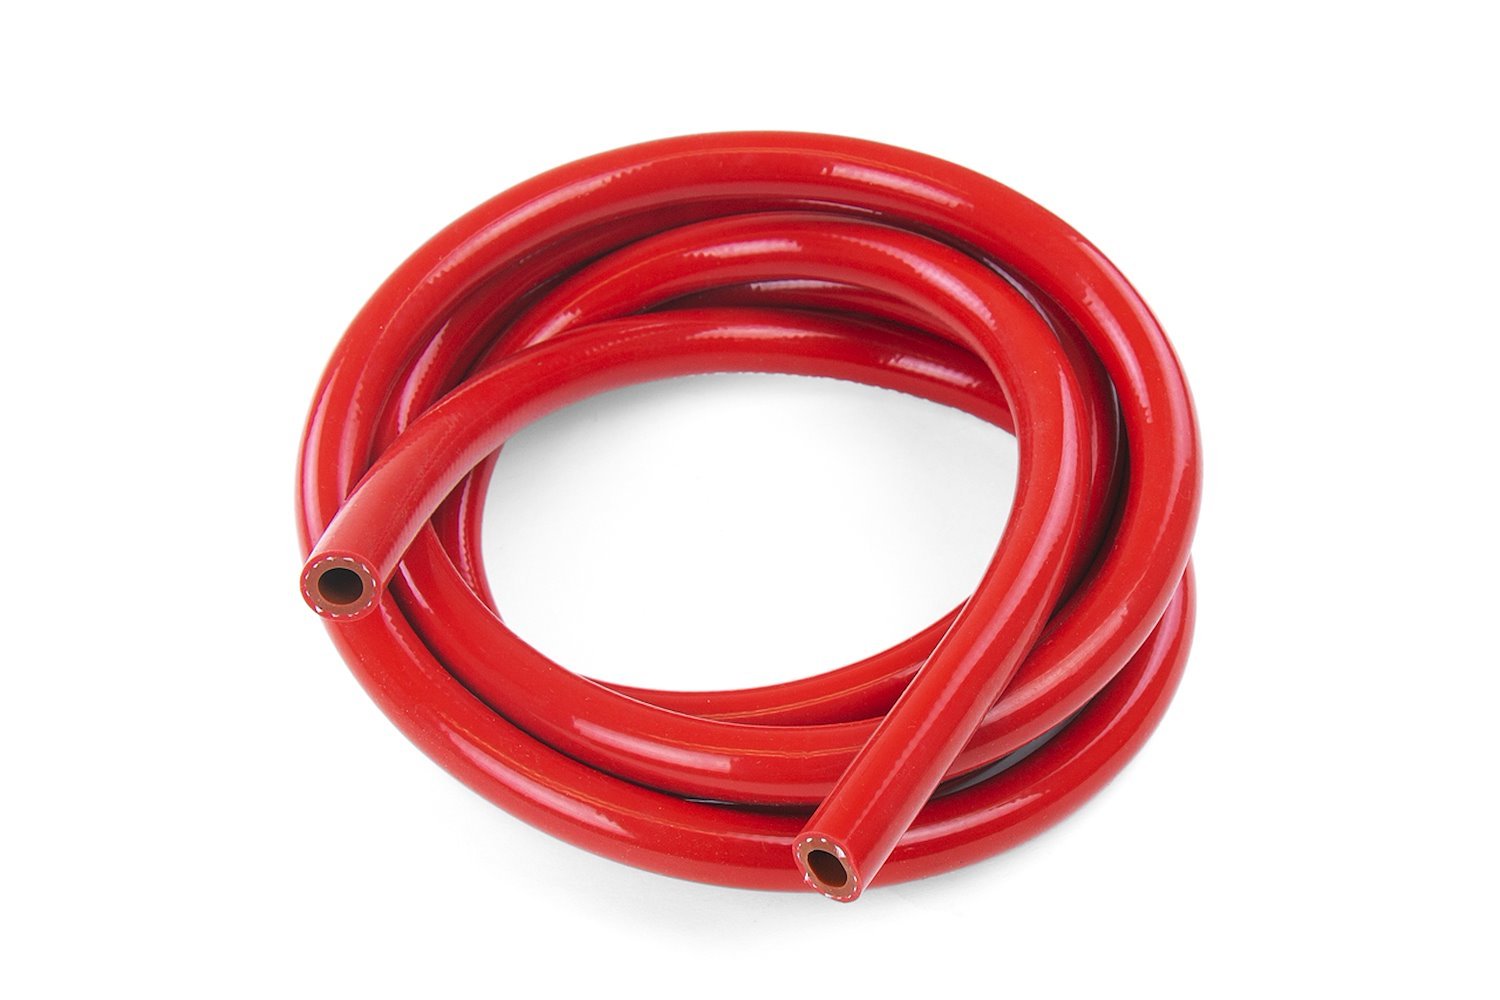 HTHH-032-REDx10 Silicone Heater Hose Tubing, High-Temp 1-Ply Reinforced, 5/16 in. ID, 10 ft. Roll, Red